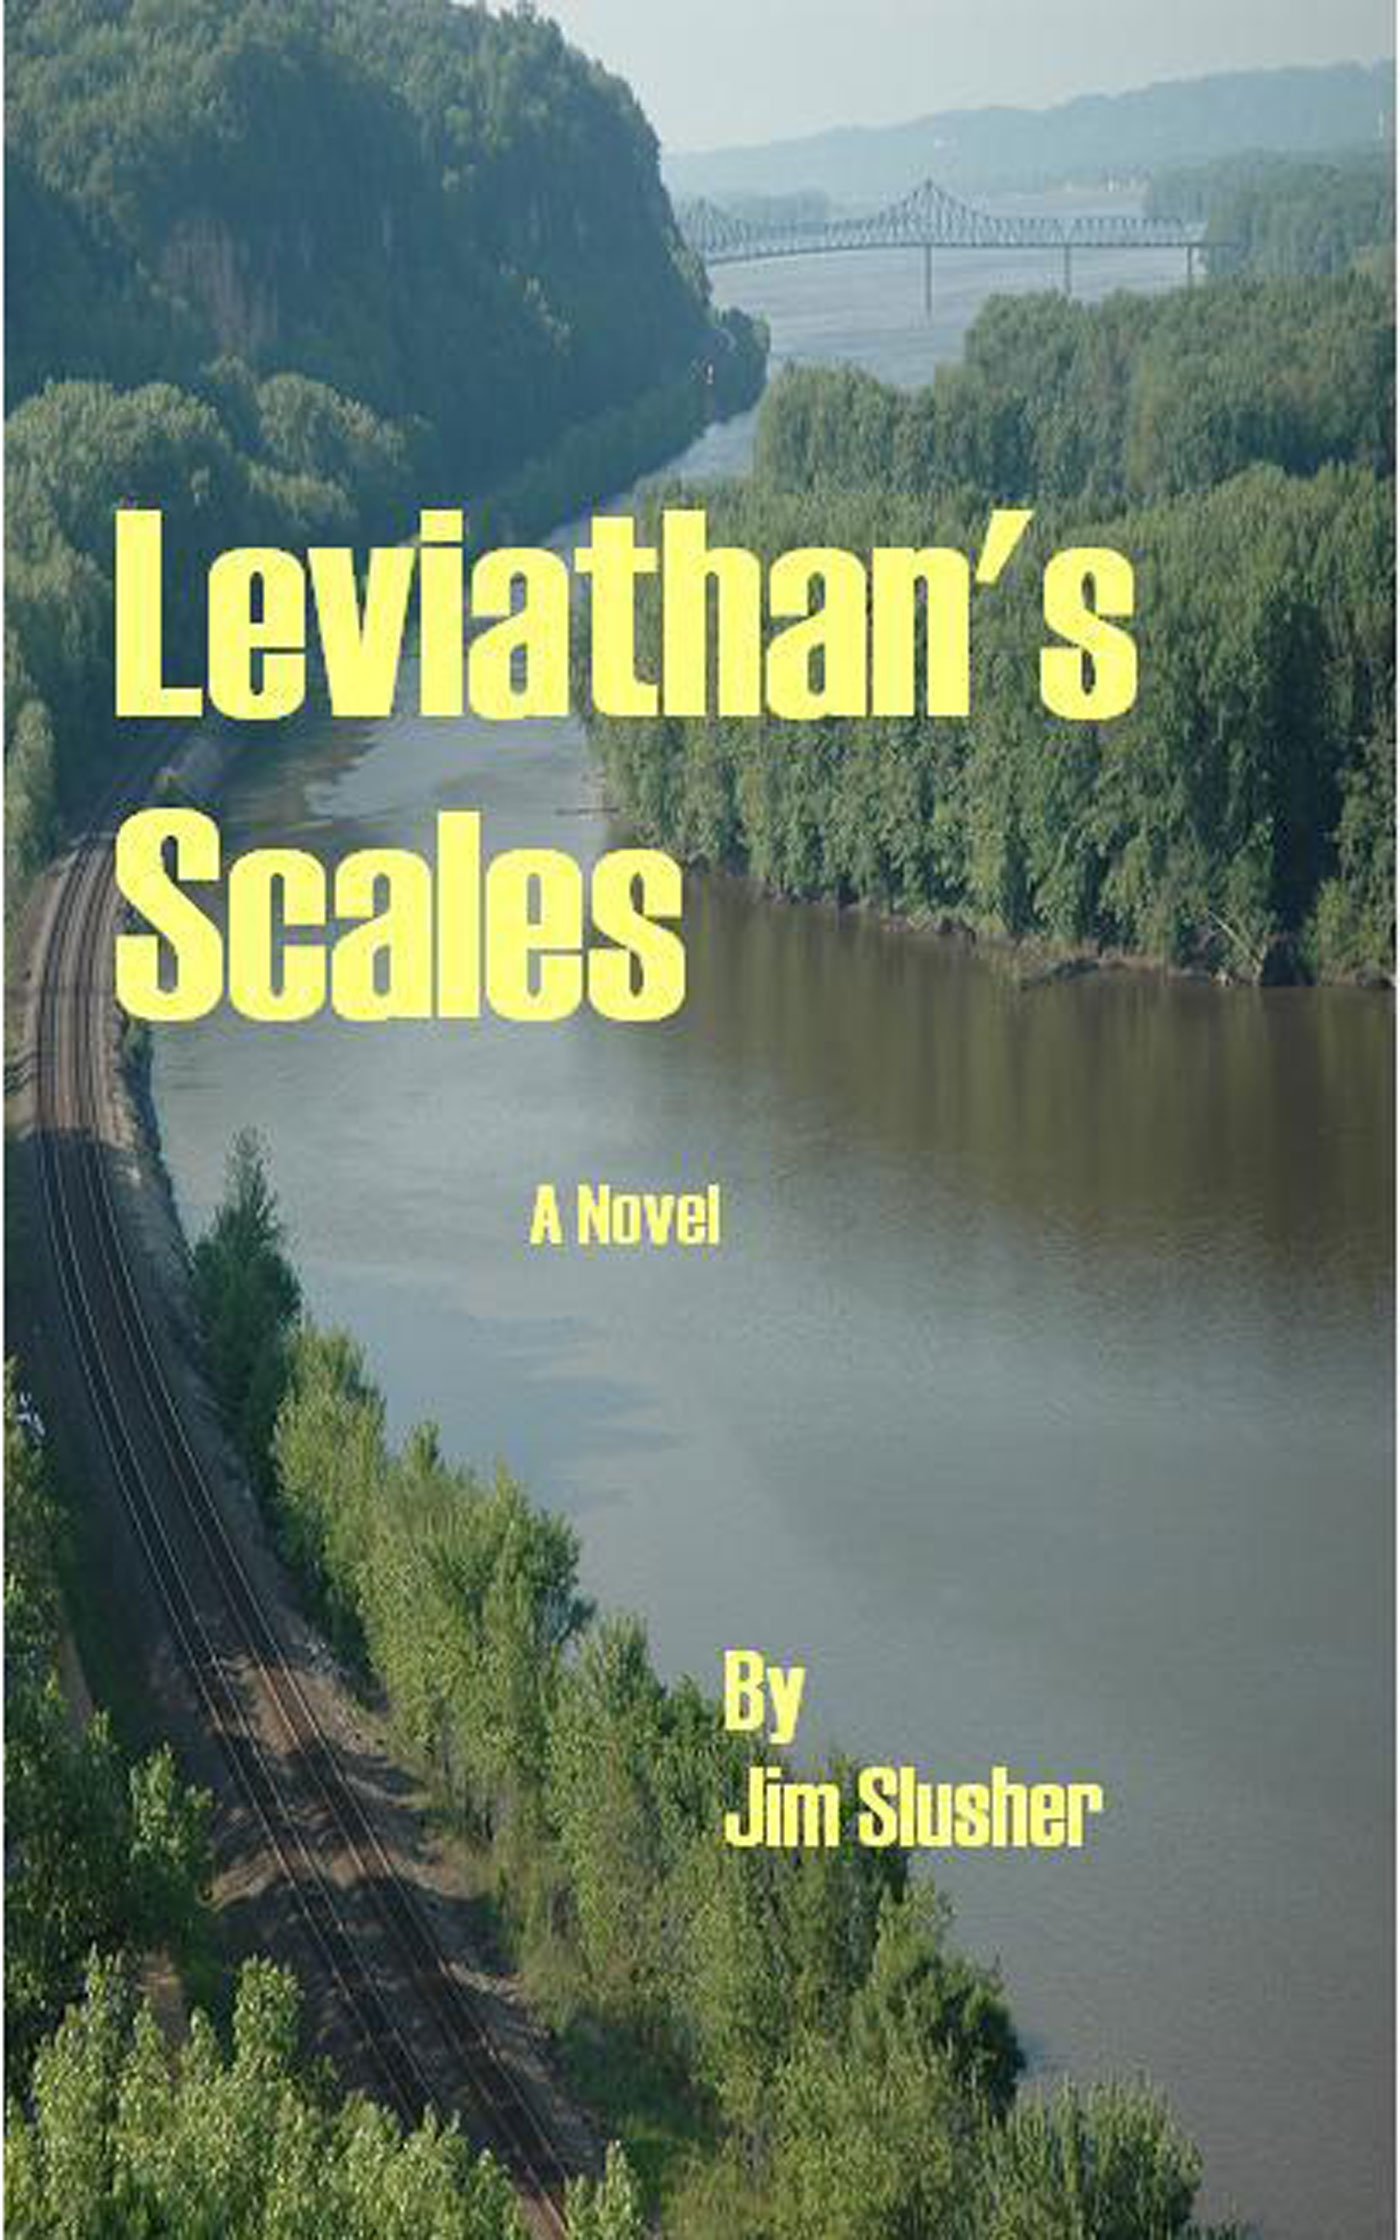 Leviathan's-cover_resized.0813